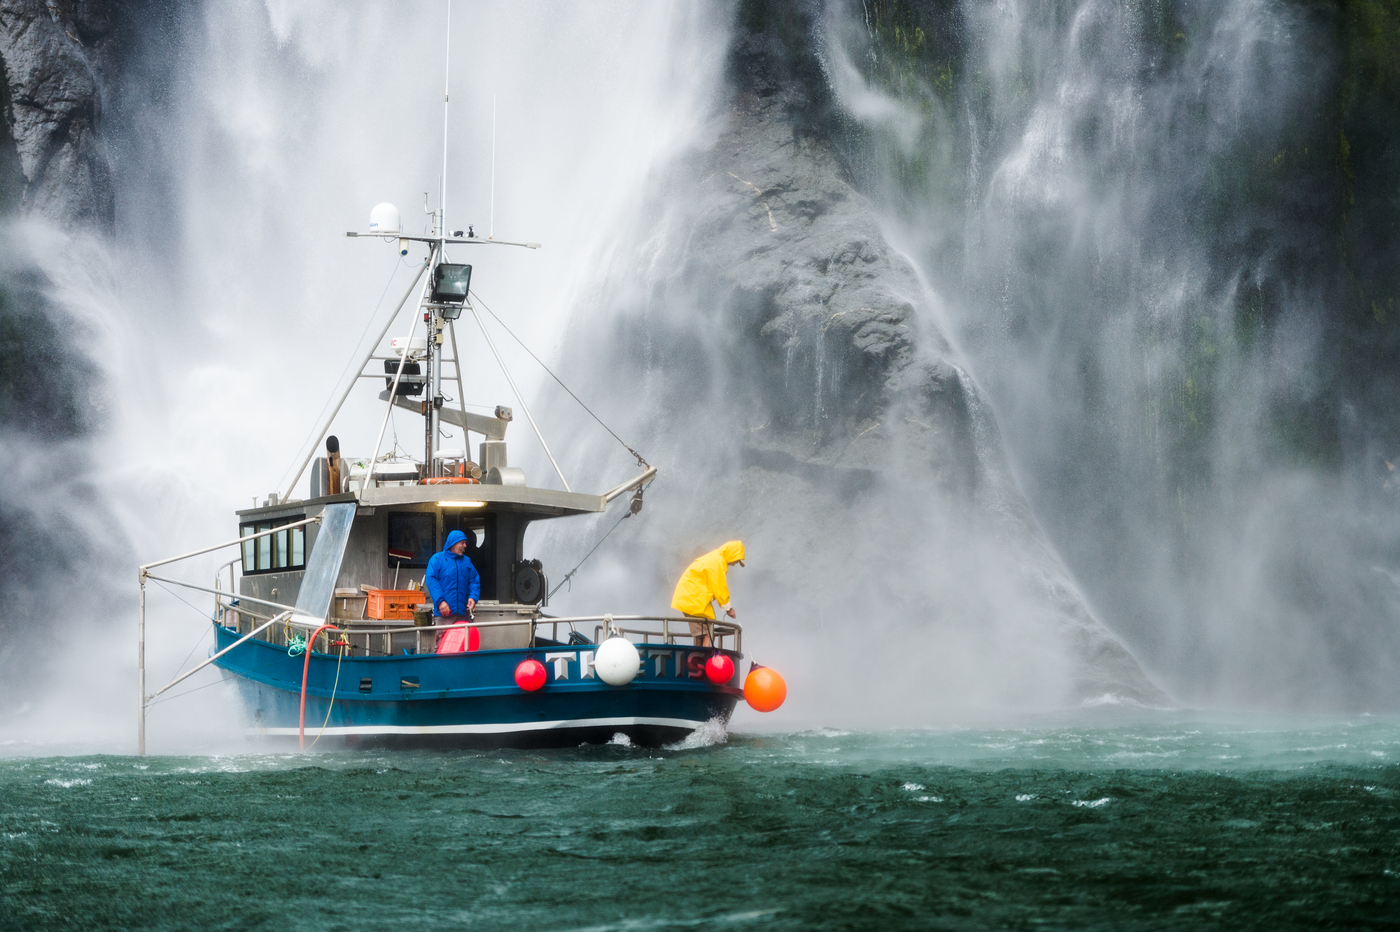 Boat fenders and buoys in use on fishing boat with crew near waterfall in New Zealand